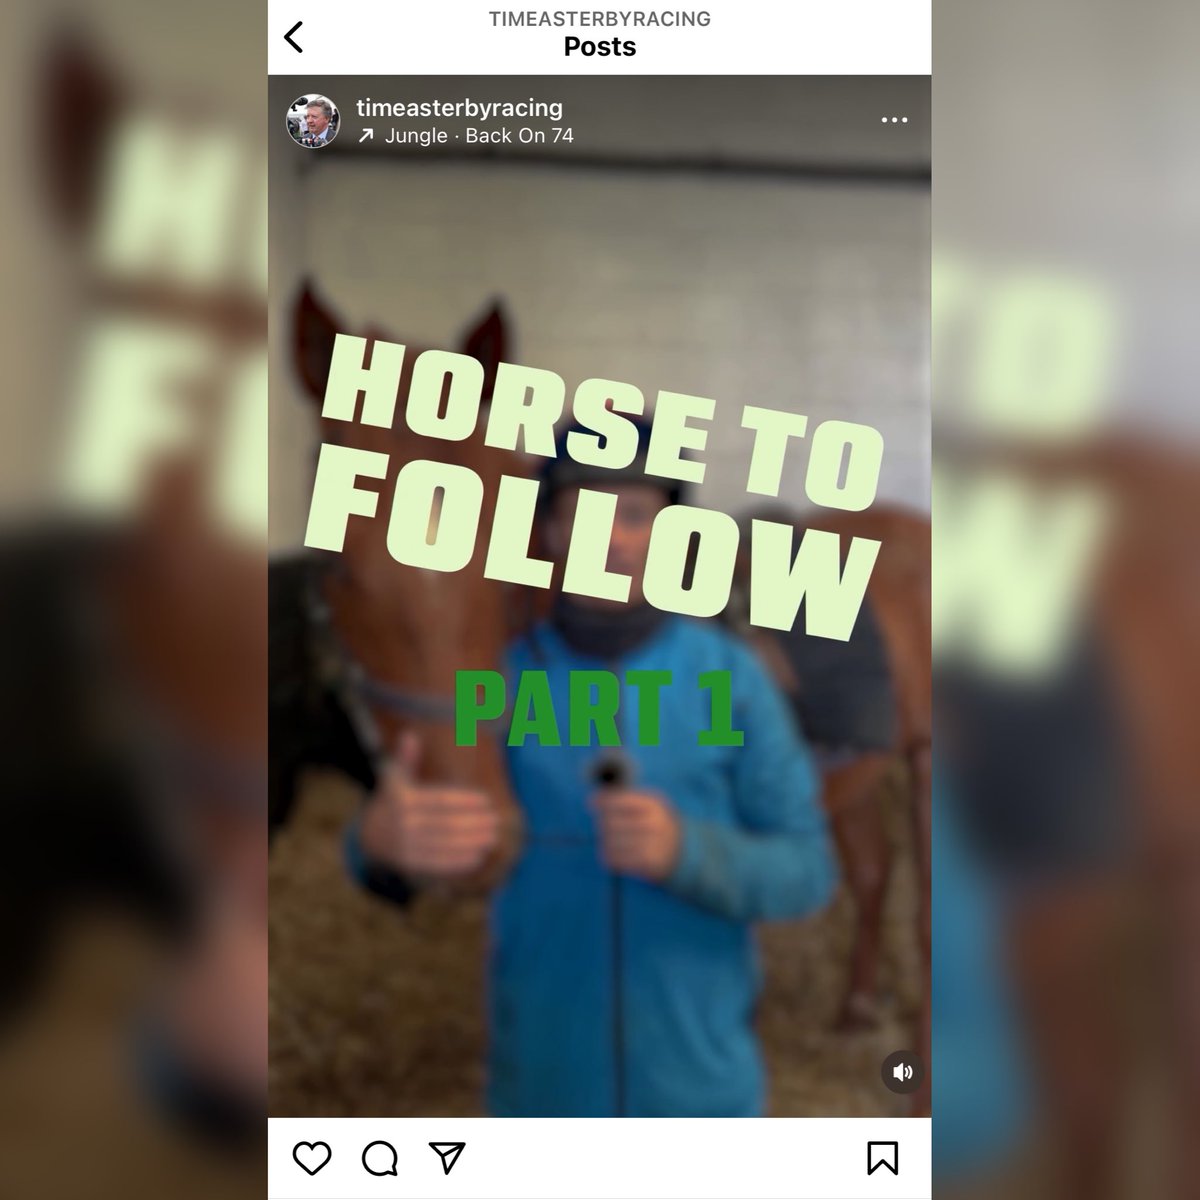 Head over to our instagram page to find out the horses our team think you should be following this year! Give us a follow so you don’t miss Part 2! instagram.com/timeasterbyrac…